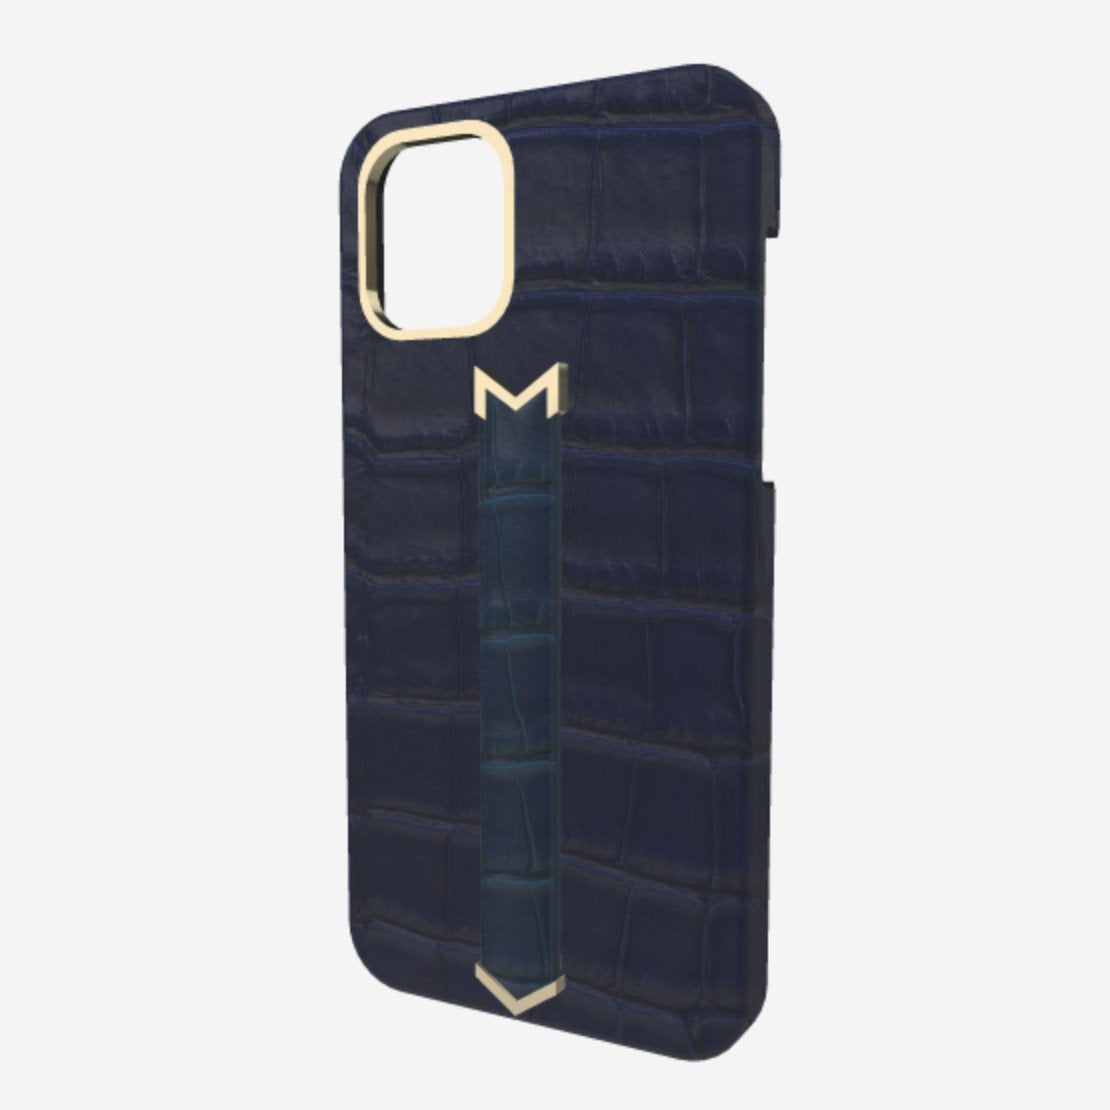 Gold Finger Strap Case for iPhone 13 Pro Max in Genuine Alligator Navy Blue Night Blue 